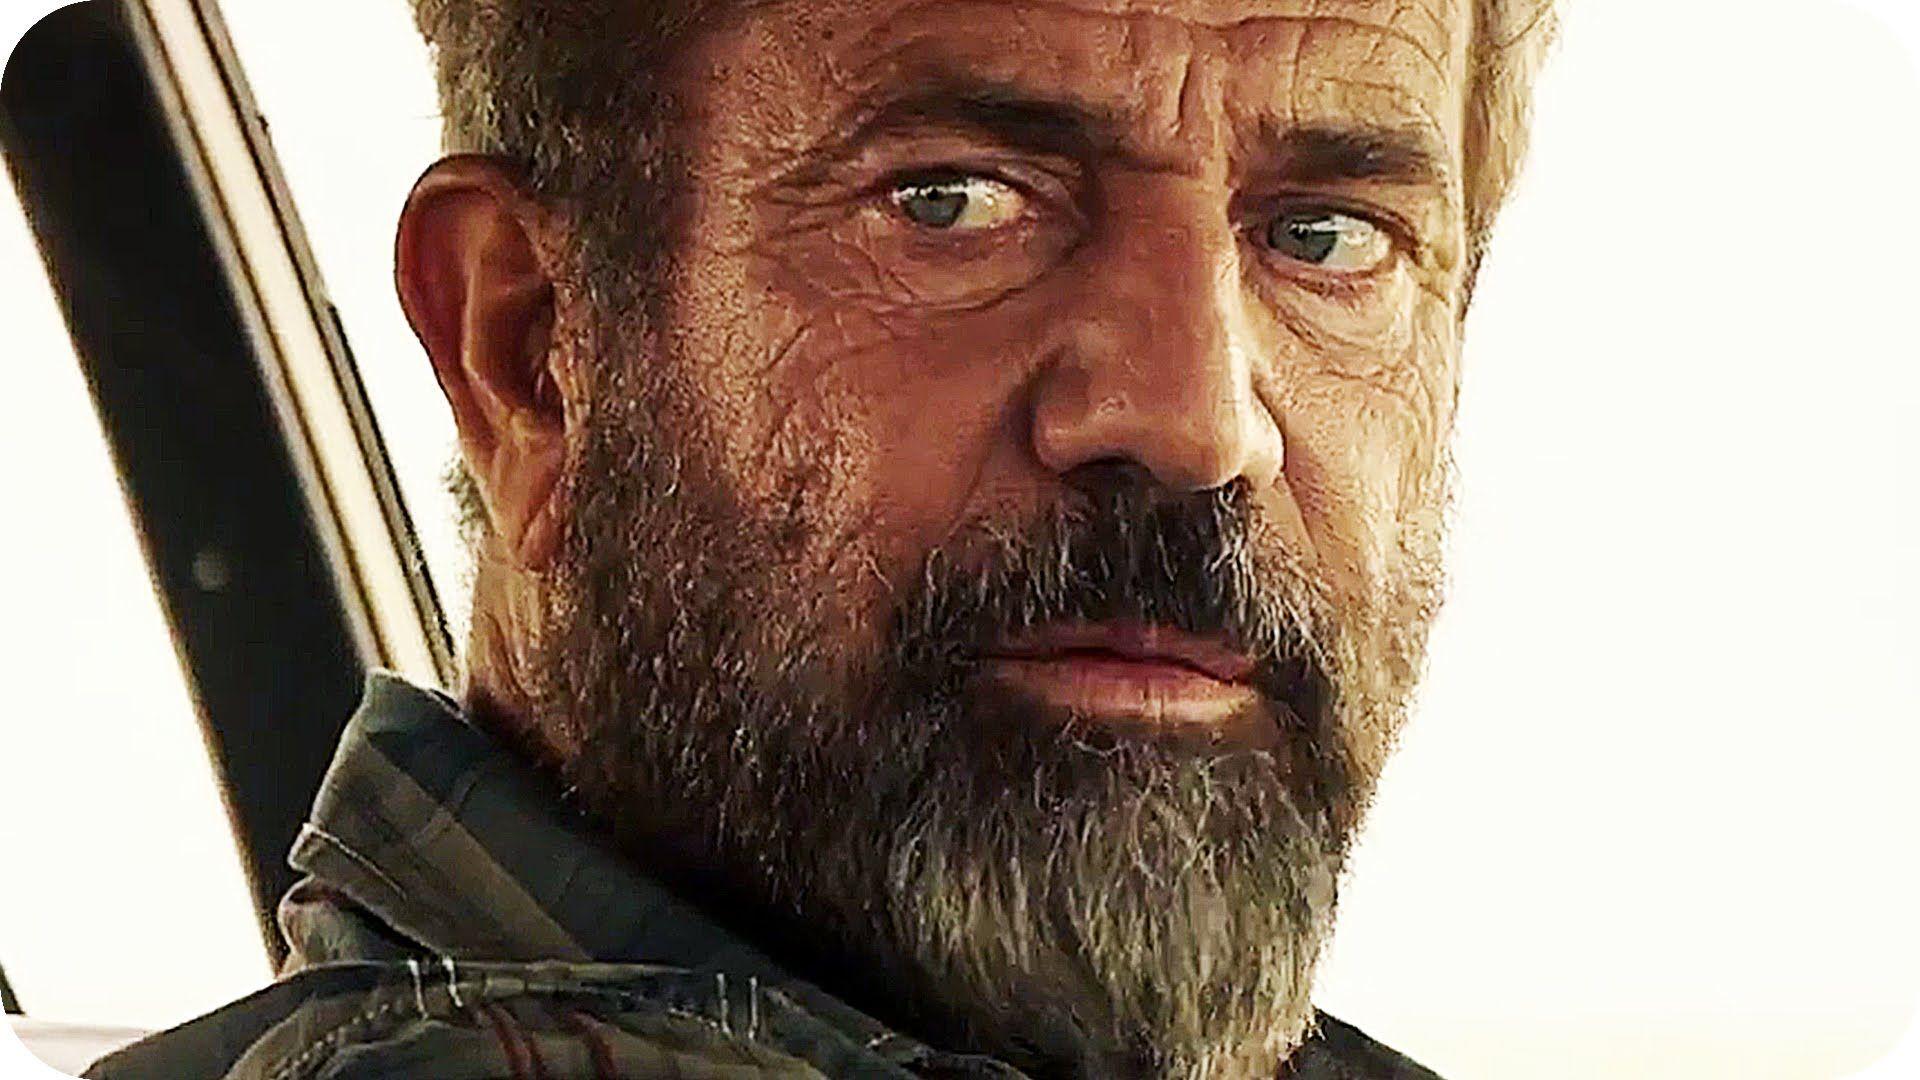 BLOOD FATHER 2 (2016) Mel Gibson Action Movie